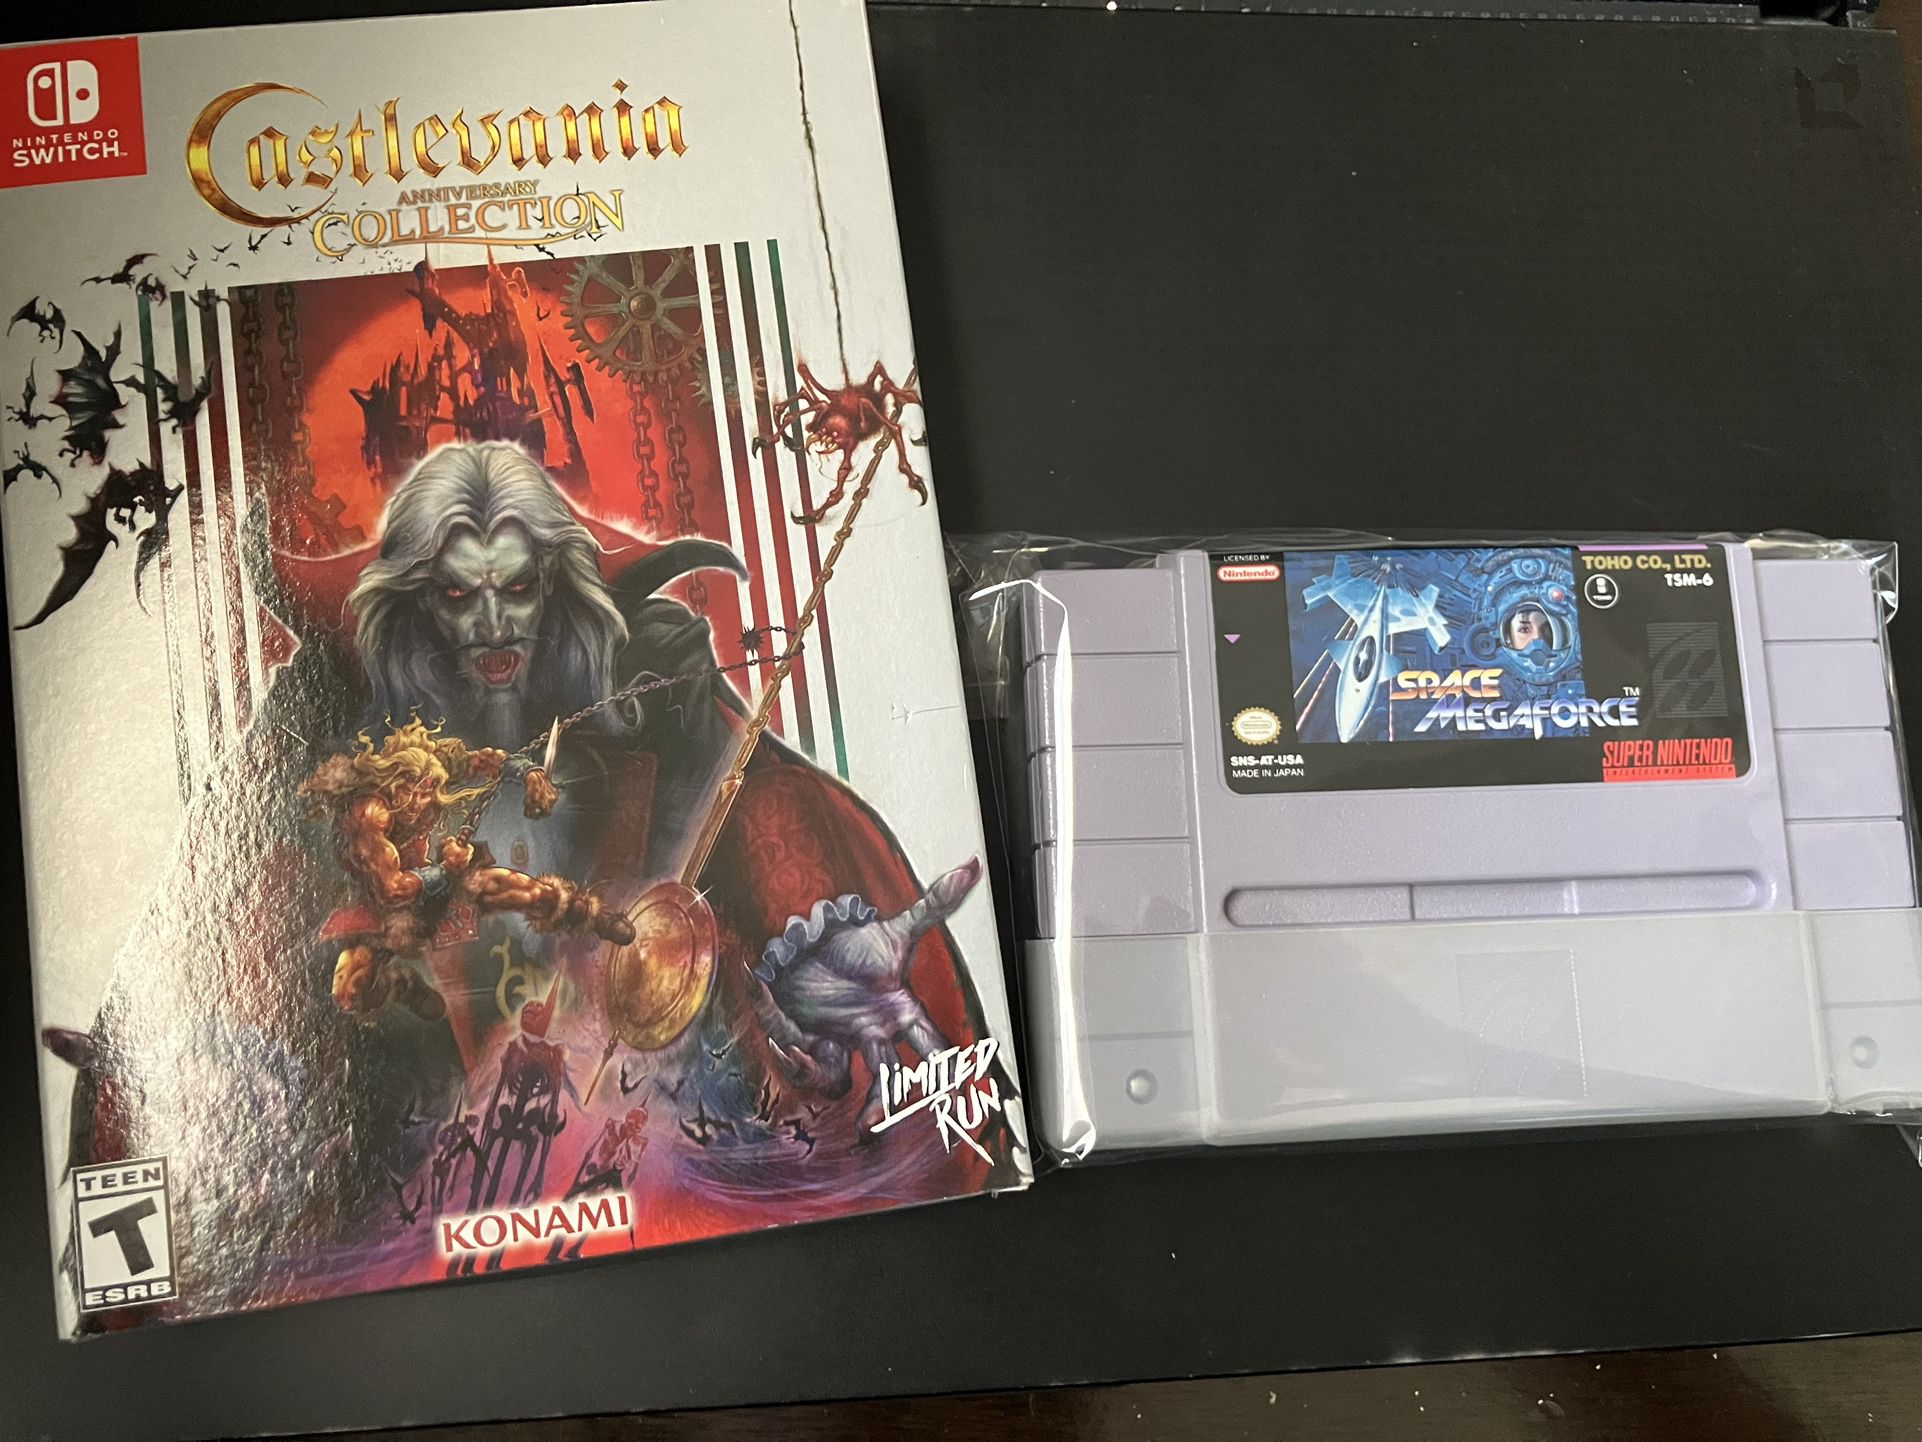 Castlevania and Space Megaforce SNES